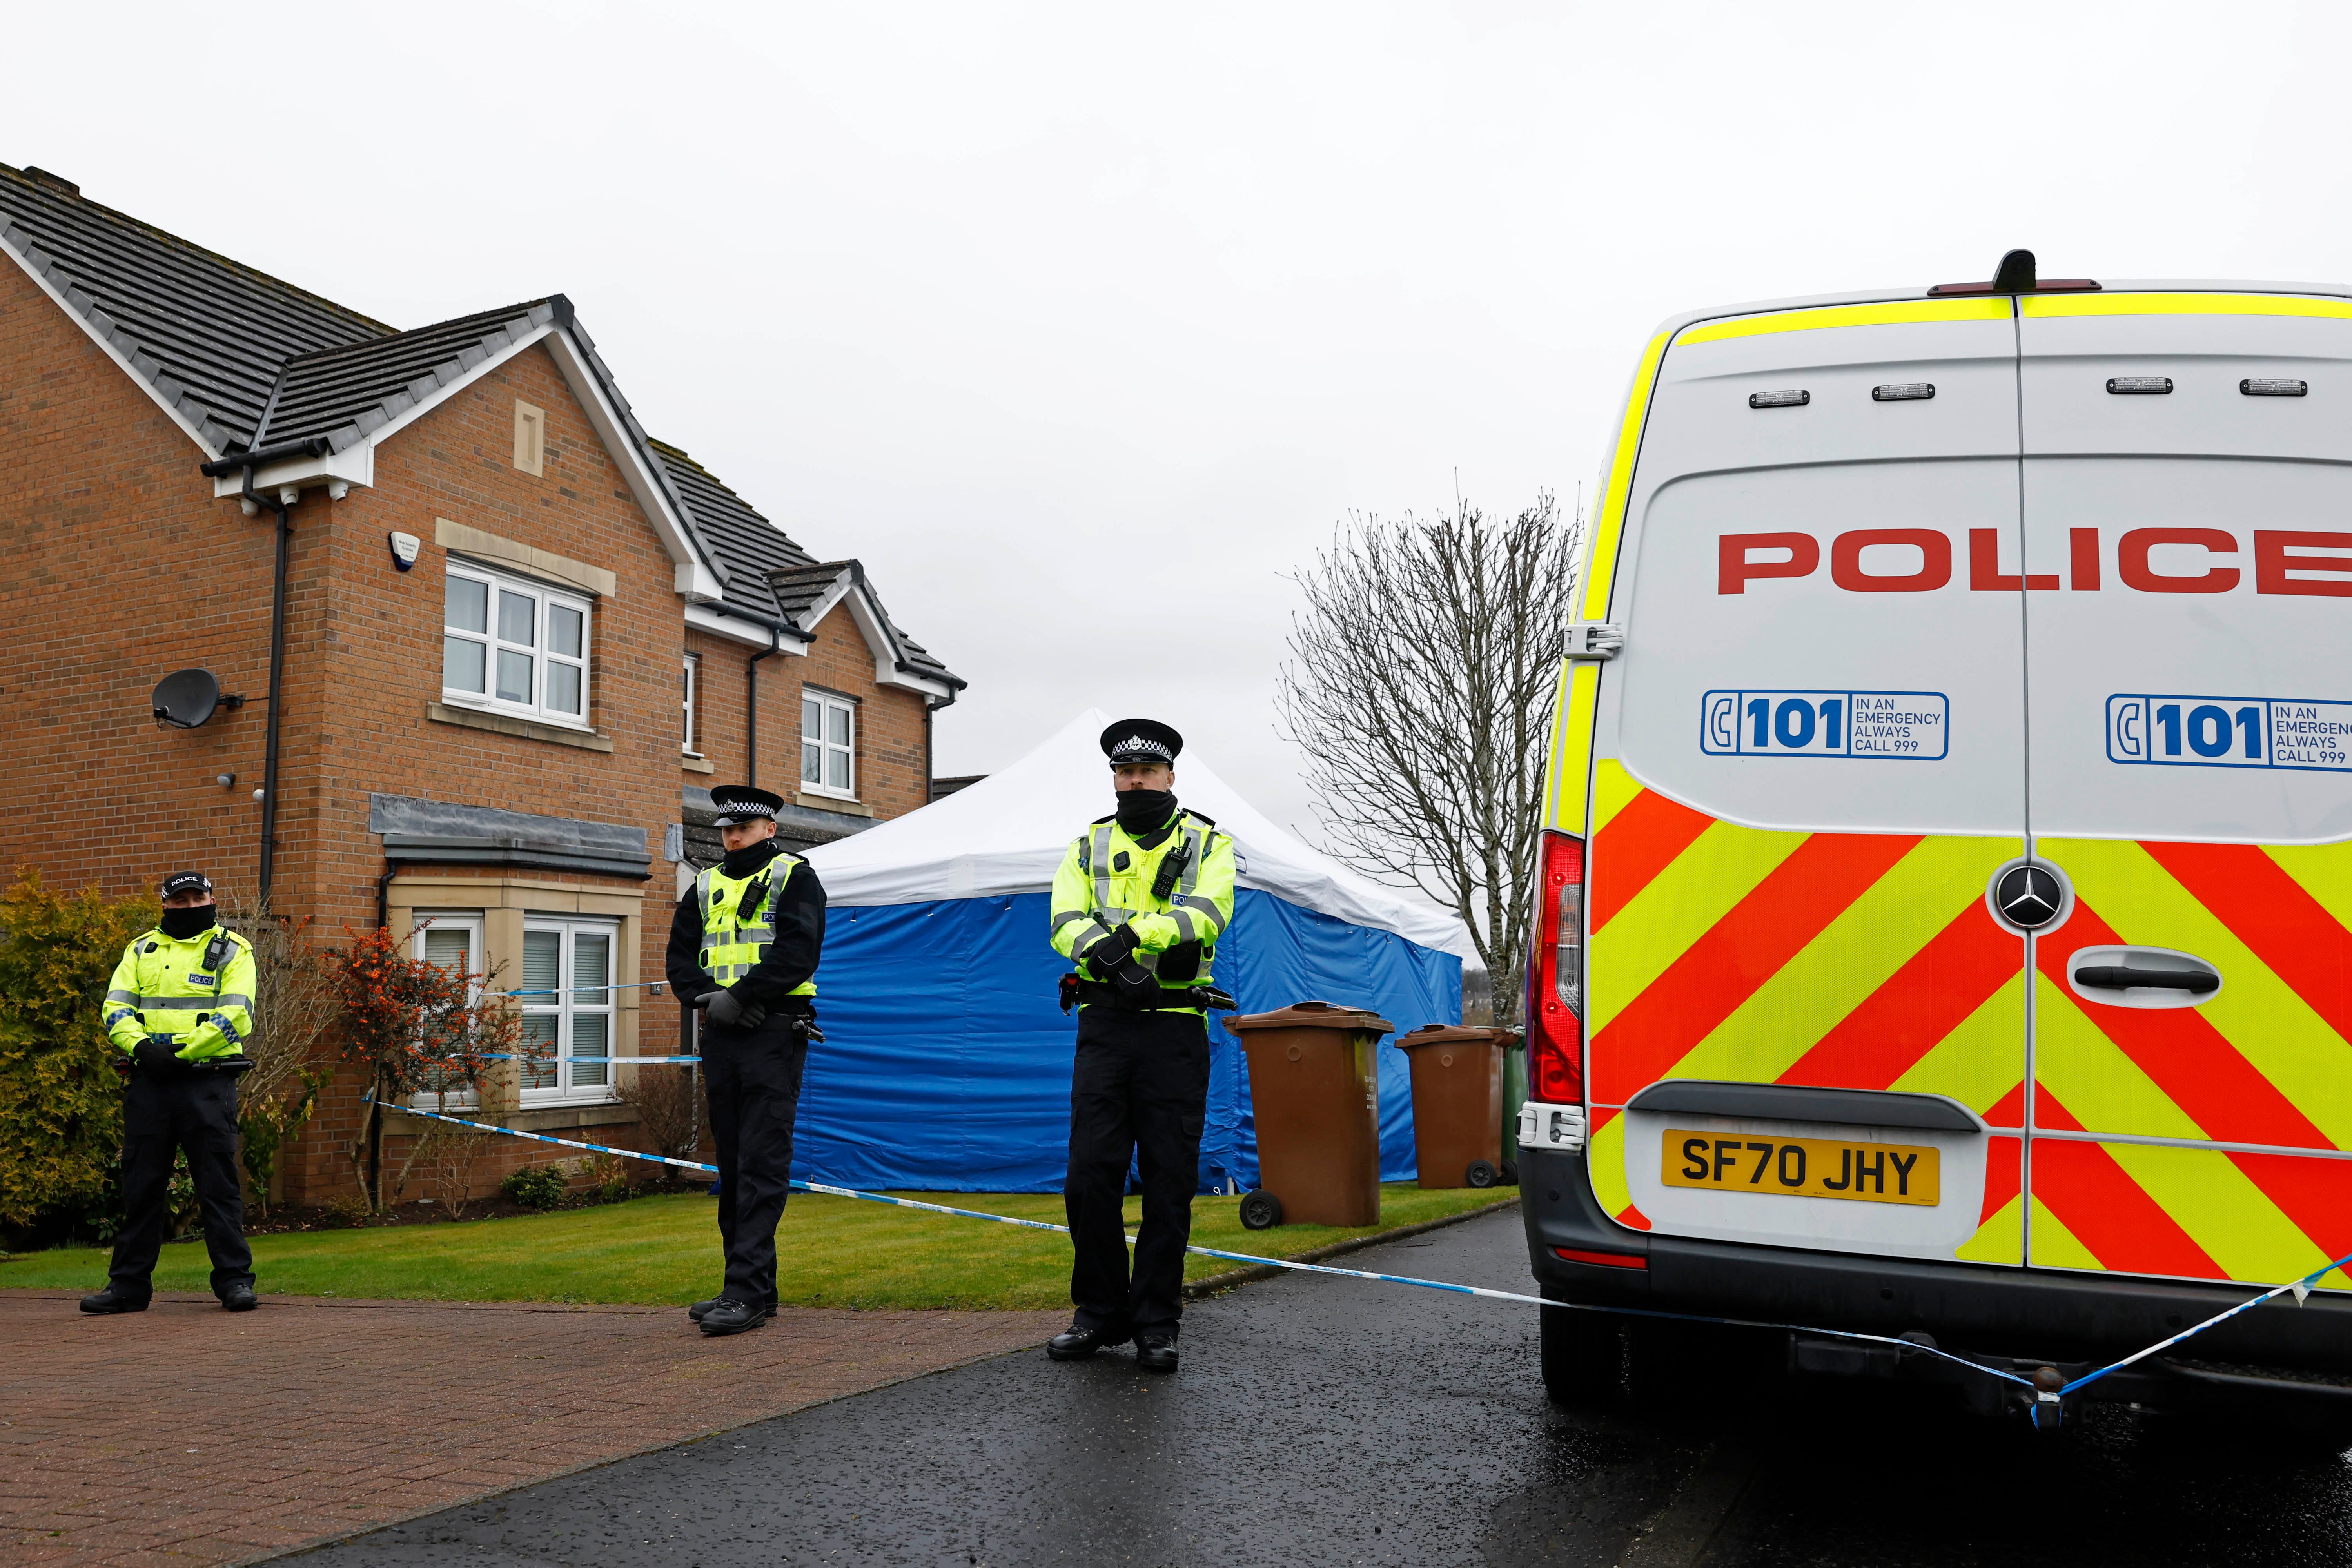 Police officers outside the home of Peter Murrell and Nicola Sturgeon in Glasgow, Scotland